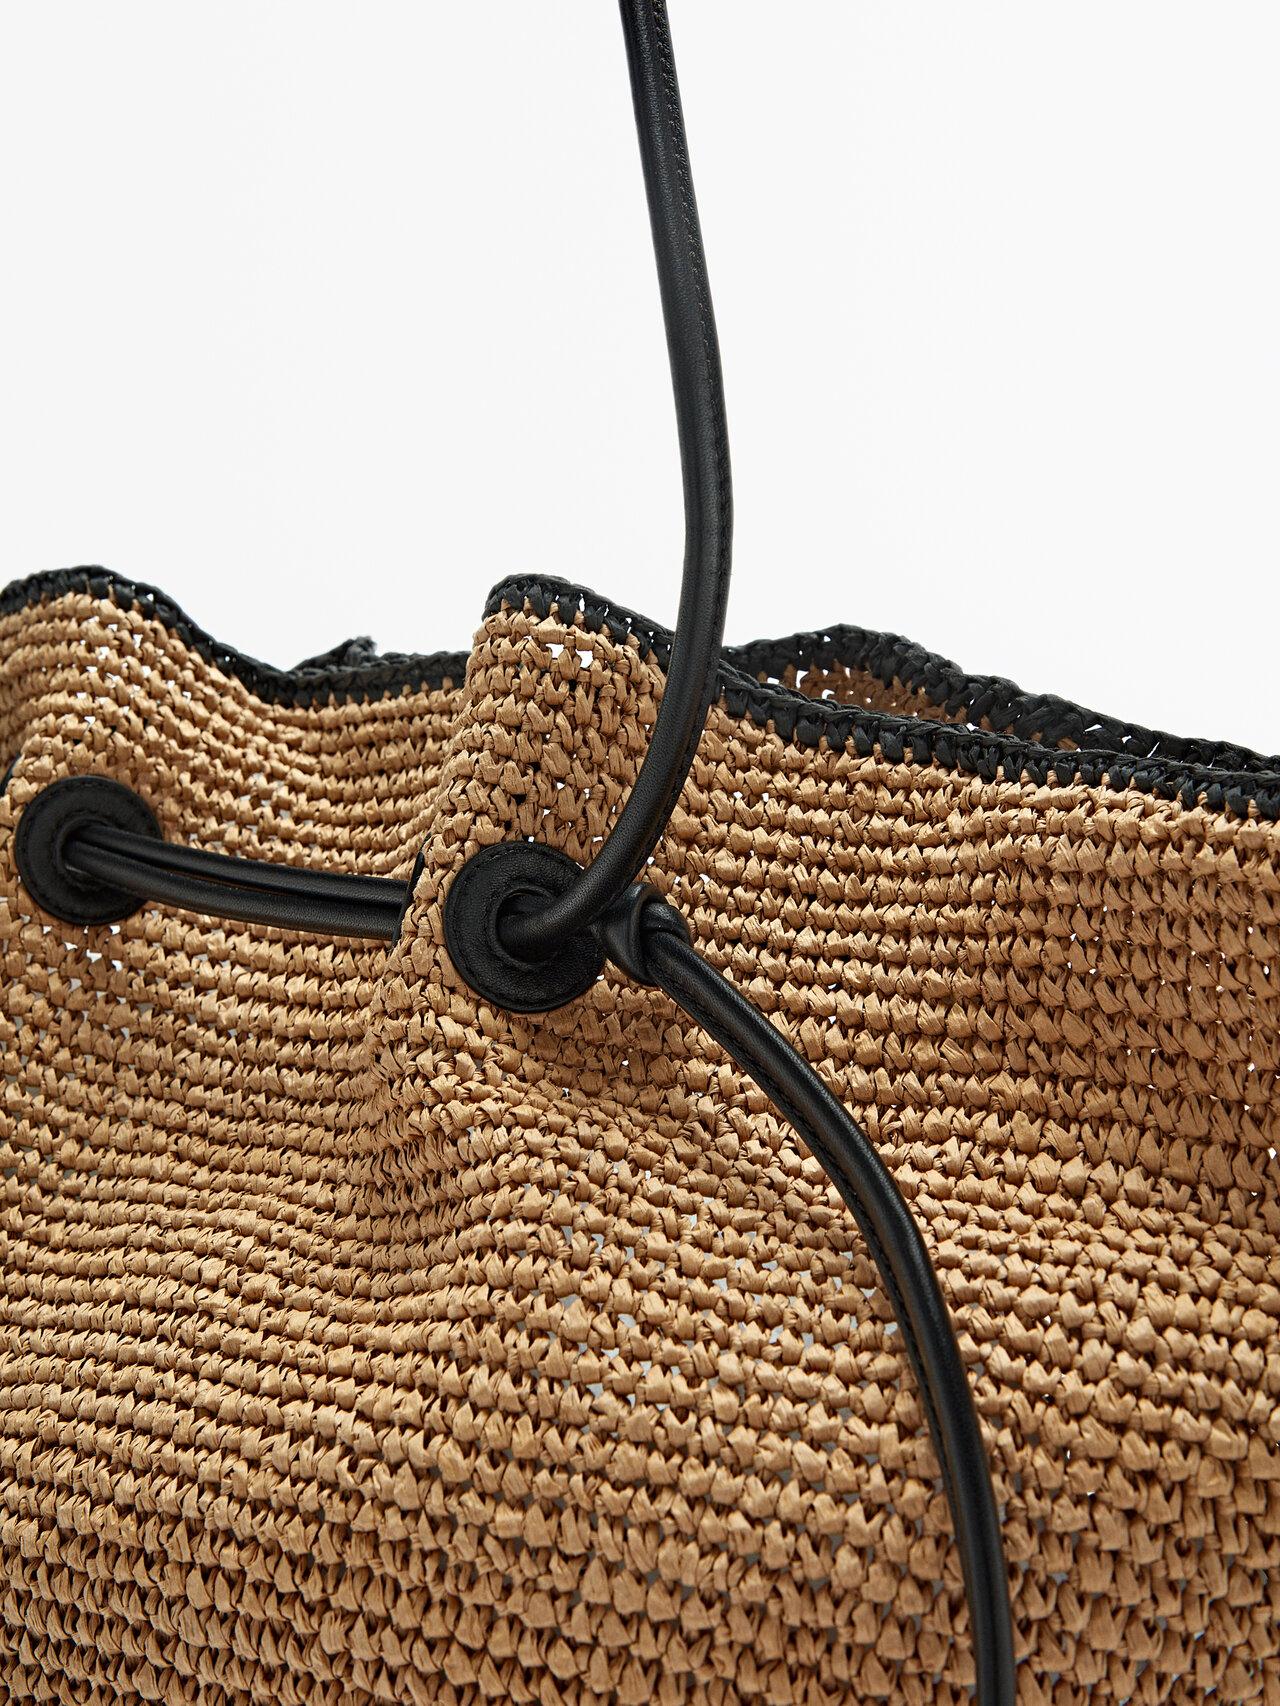 MASSIMO DUTTI Floral Raffia Tote Bag With Leather Handles in Natural | Lyst